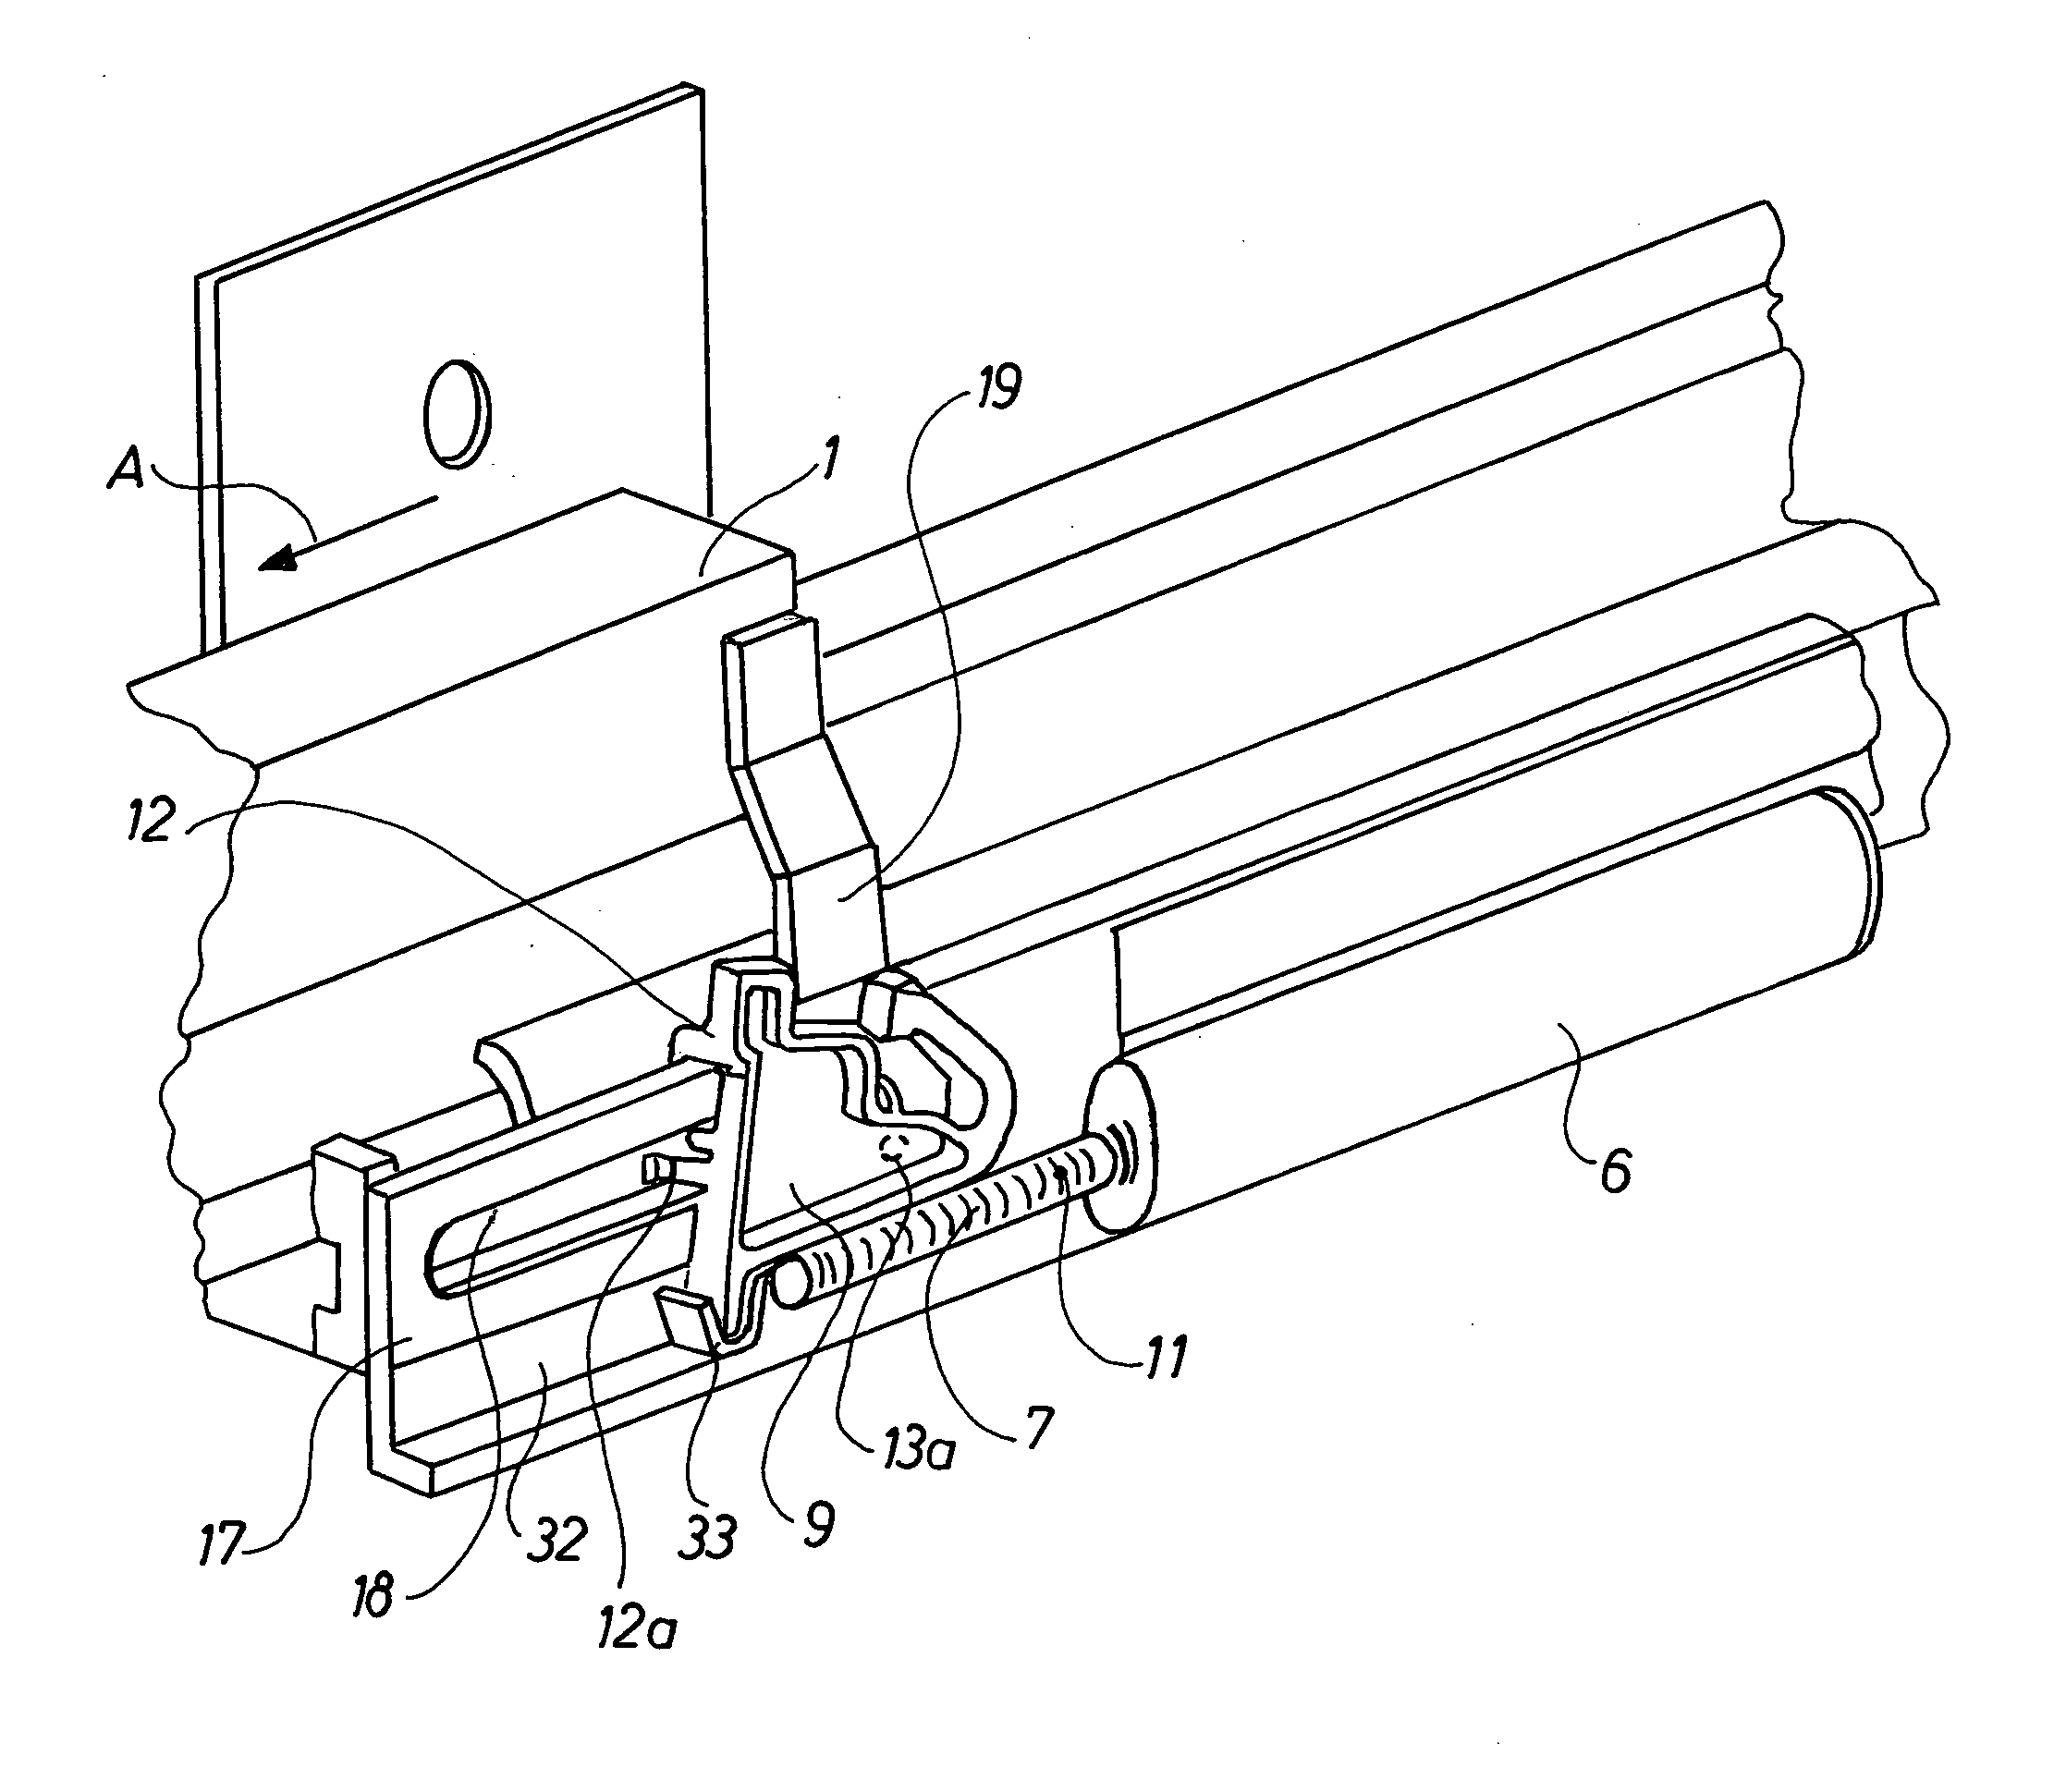 Device for securing a soft ending of the opening movement of a drawer